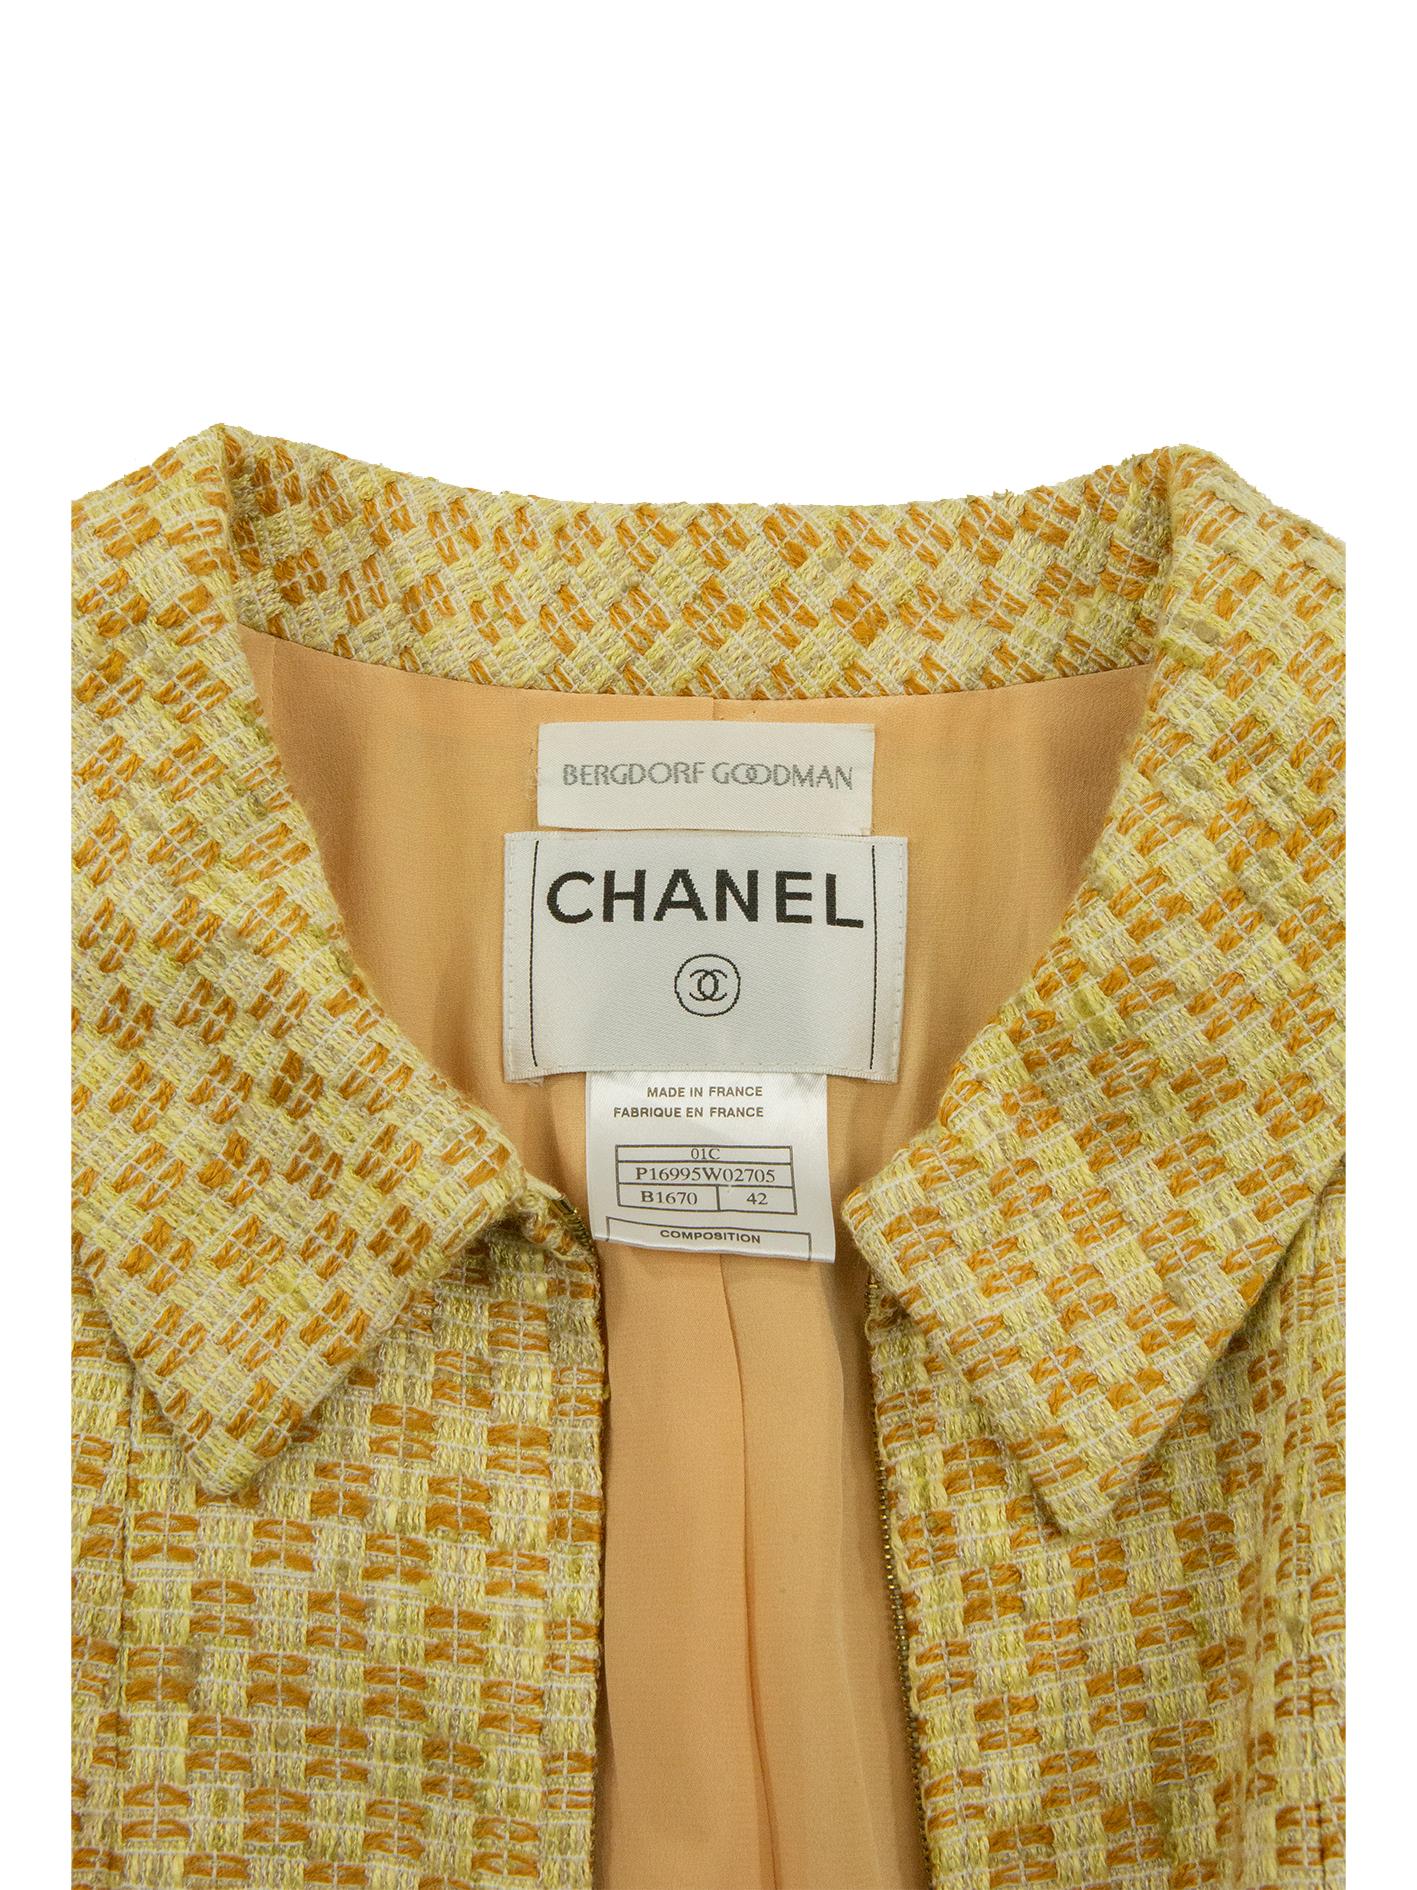 Chanel Cruise 2001 Tweed Coat For Sale 3